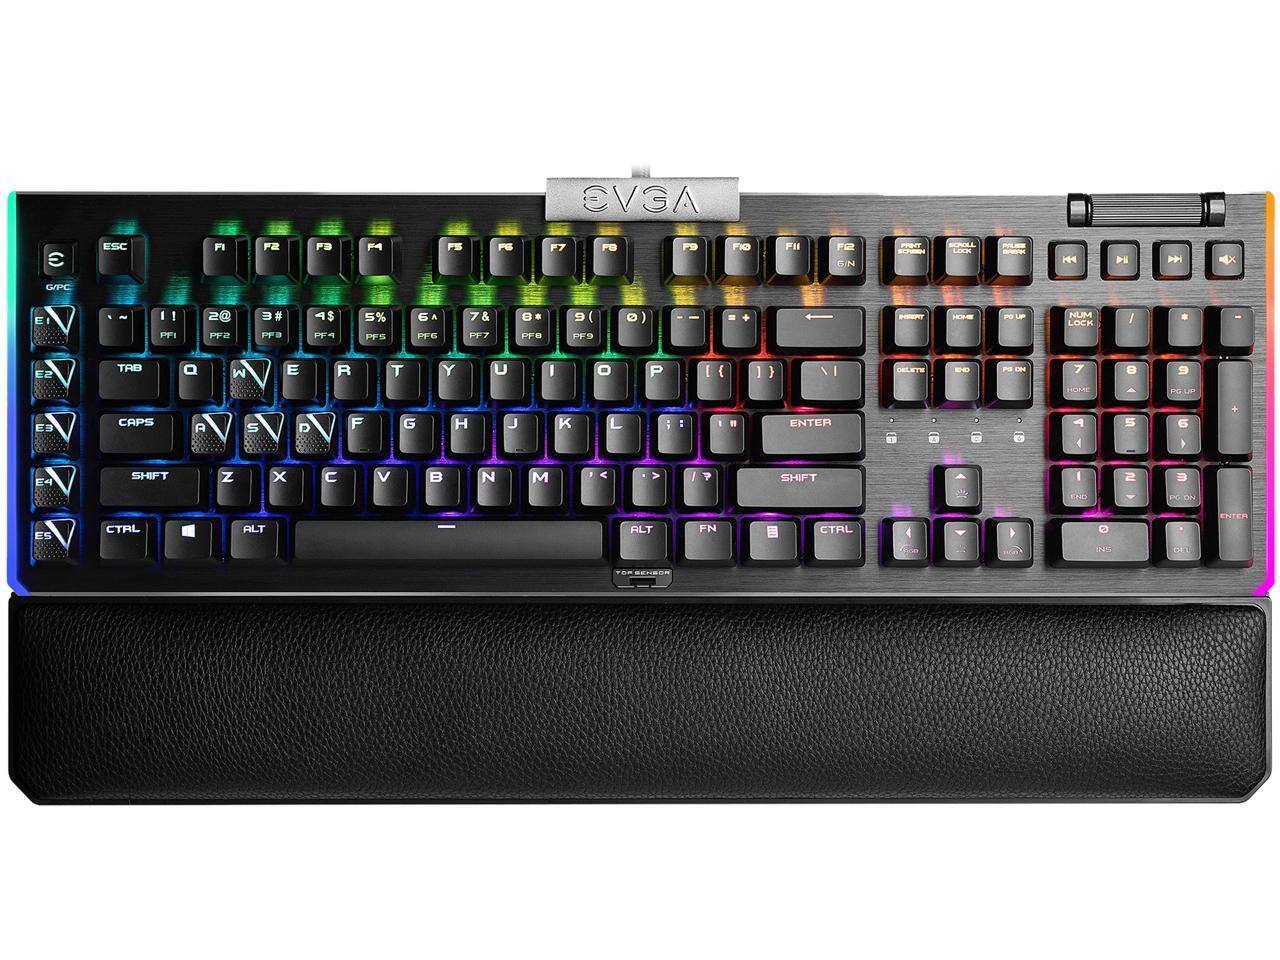 EVGA Z20 RGB Optical Mechanical Gaming Keyboard [Clicky] for $74.99 + Free Shipping